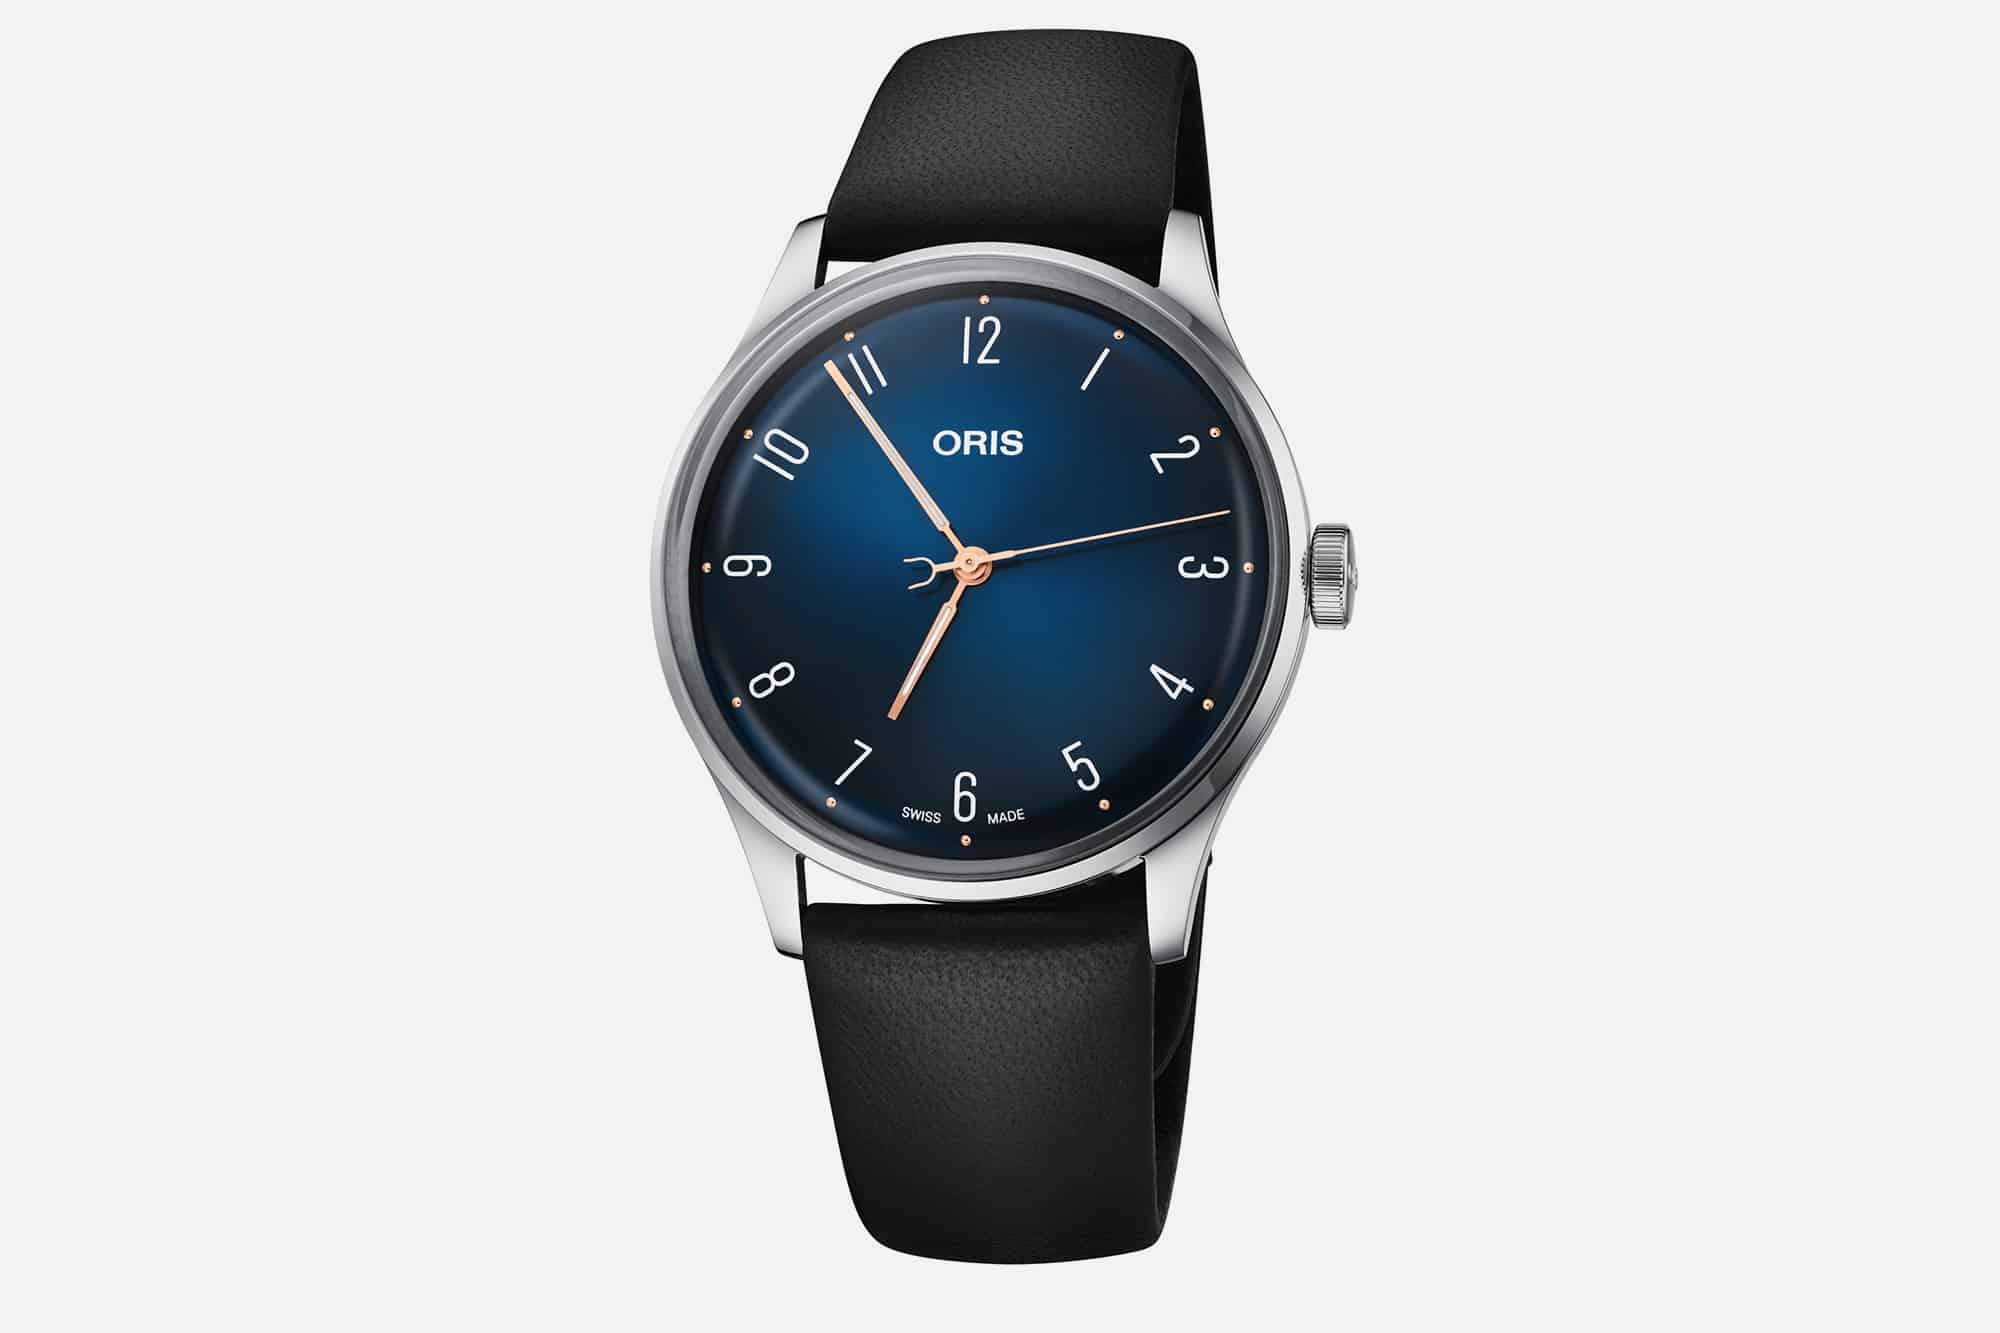 Introducing the Oris James Morrison AoM Limited Edition